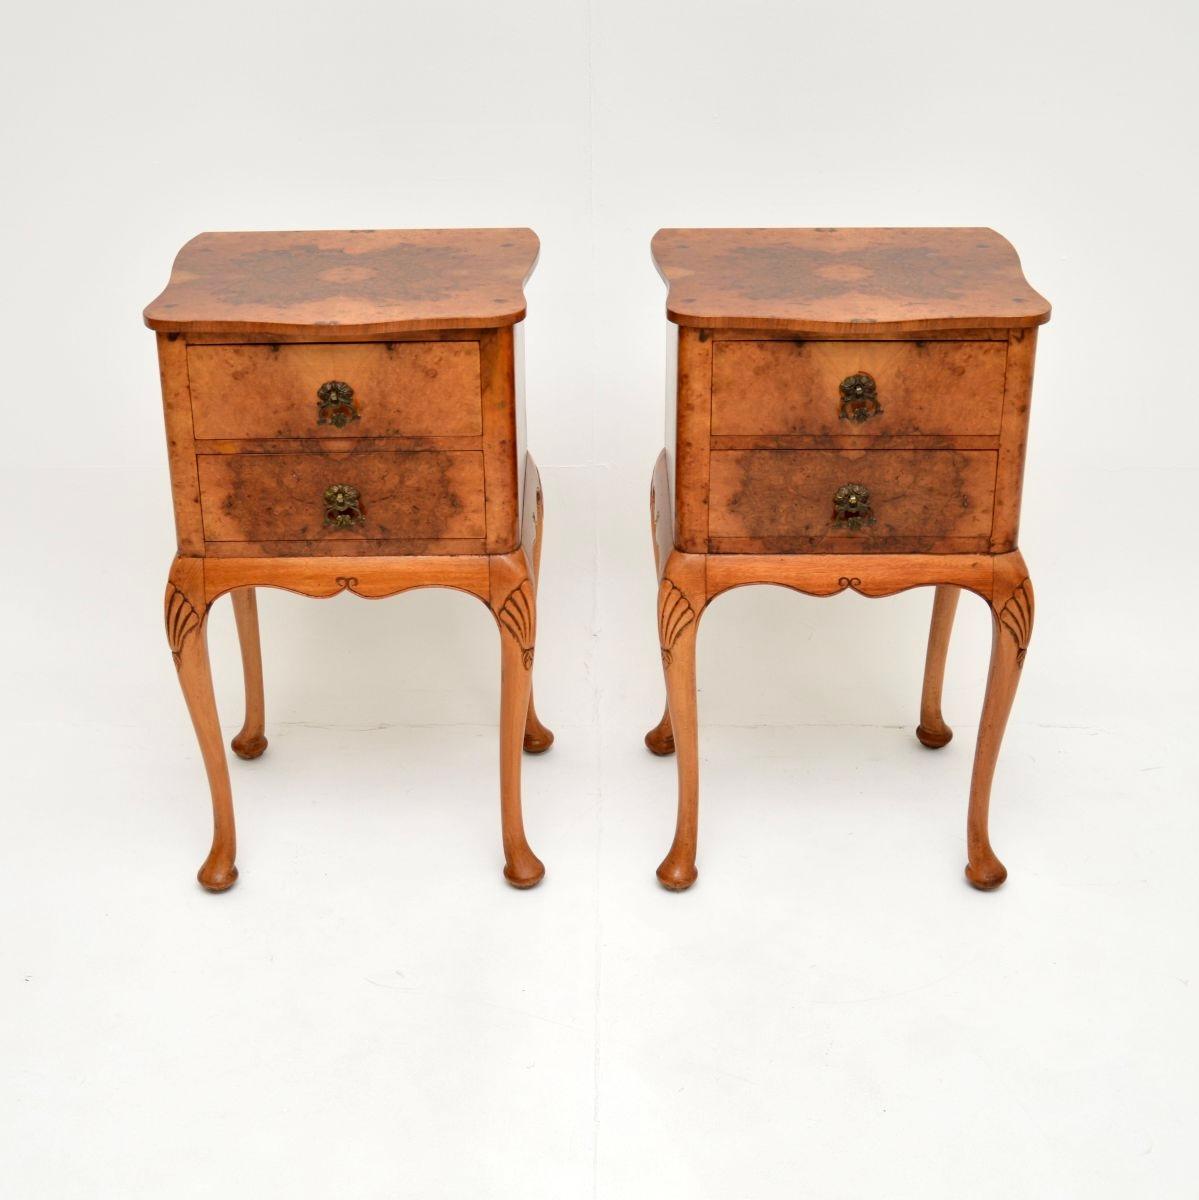 A stunning pair of antique burr walnut bedside cabinets, made in England and dating from around the 1900-1920 period.

They are of superb quality and display gorgeous burr walnut grain patterns throughout. The tops have serpentine shaped fronts with